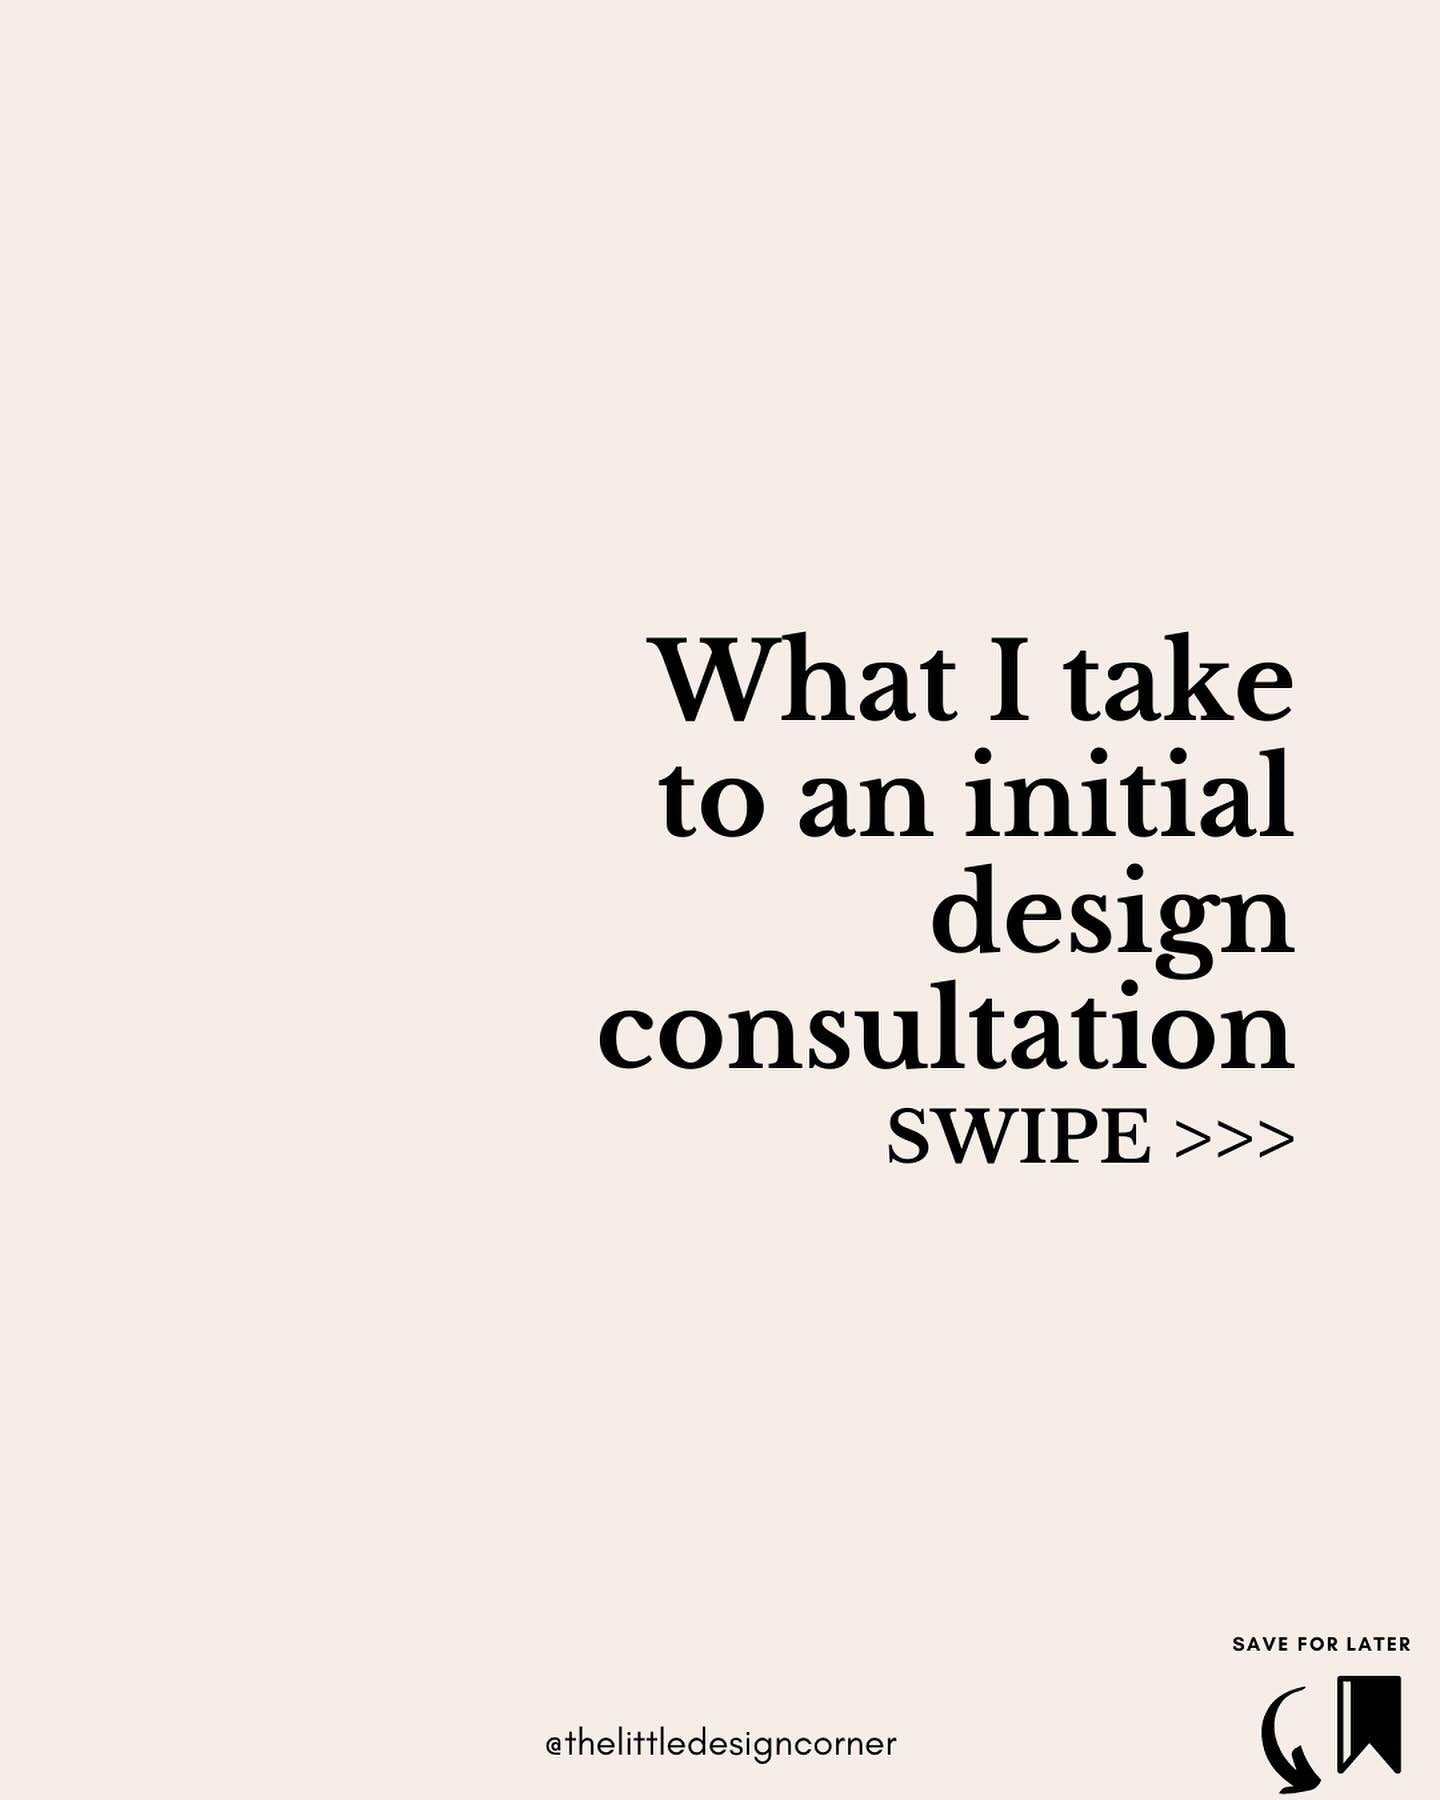 Here&rsquo;s my initial design consultation toolkit [+ FREE GUIDE]

I had this toolkit of supplies ready and packed at all times so I could just grab it each time I walked out the door to meet a new client.

Here&rsquo;s what I had in it:
✅ A print o